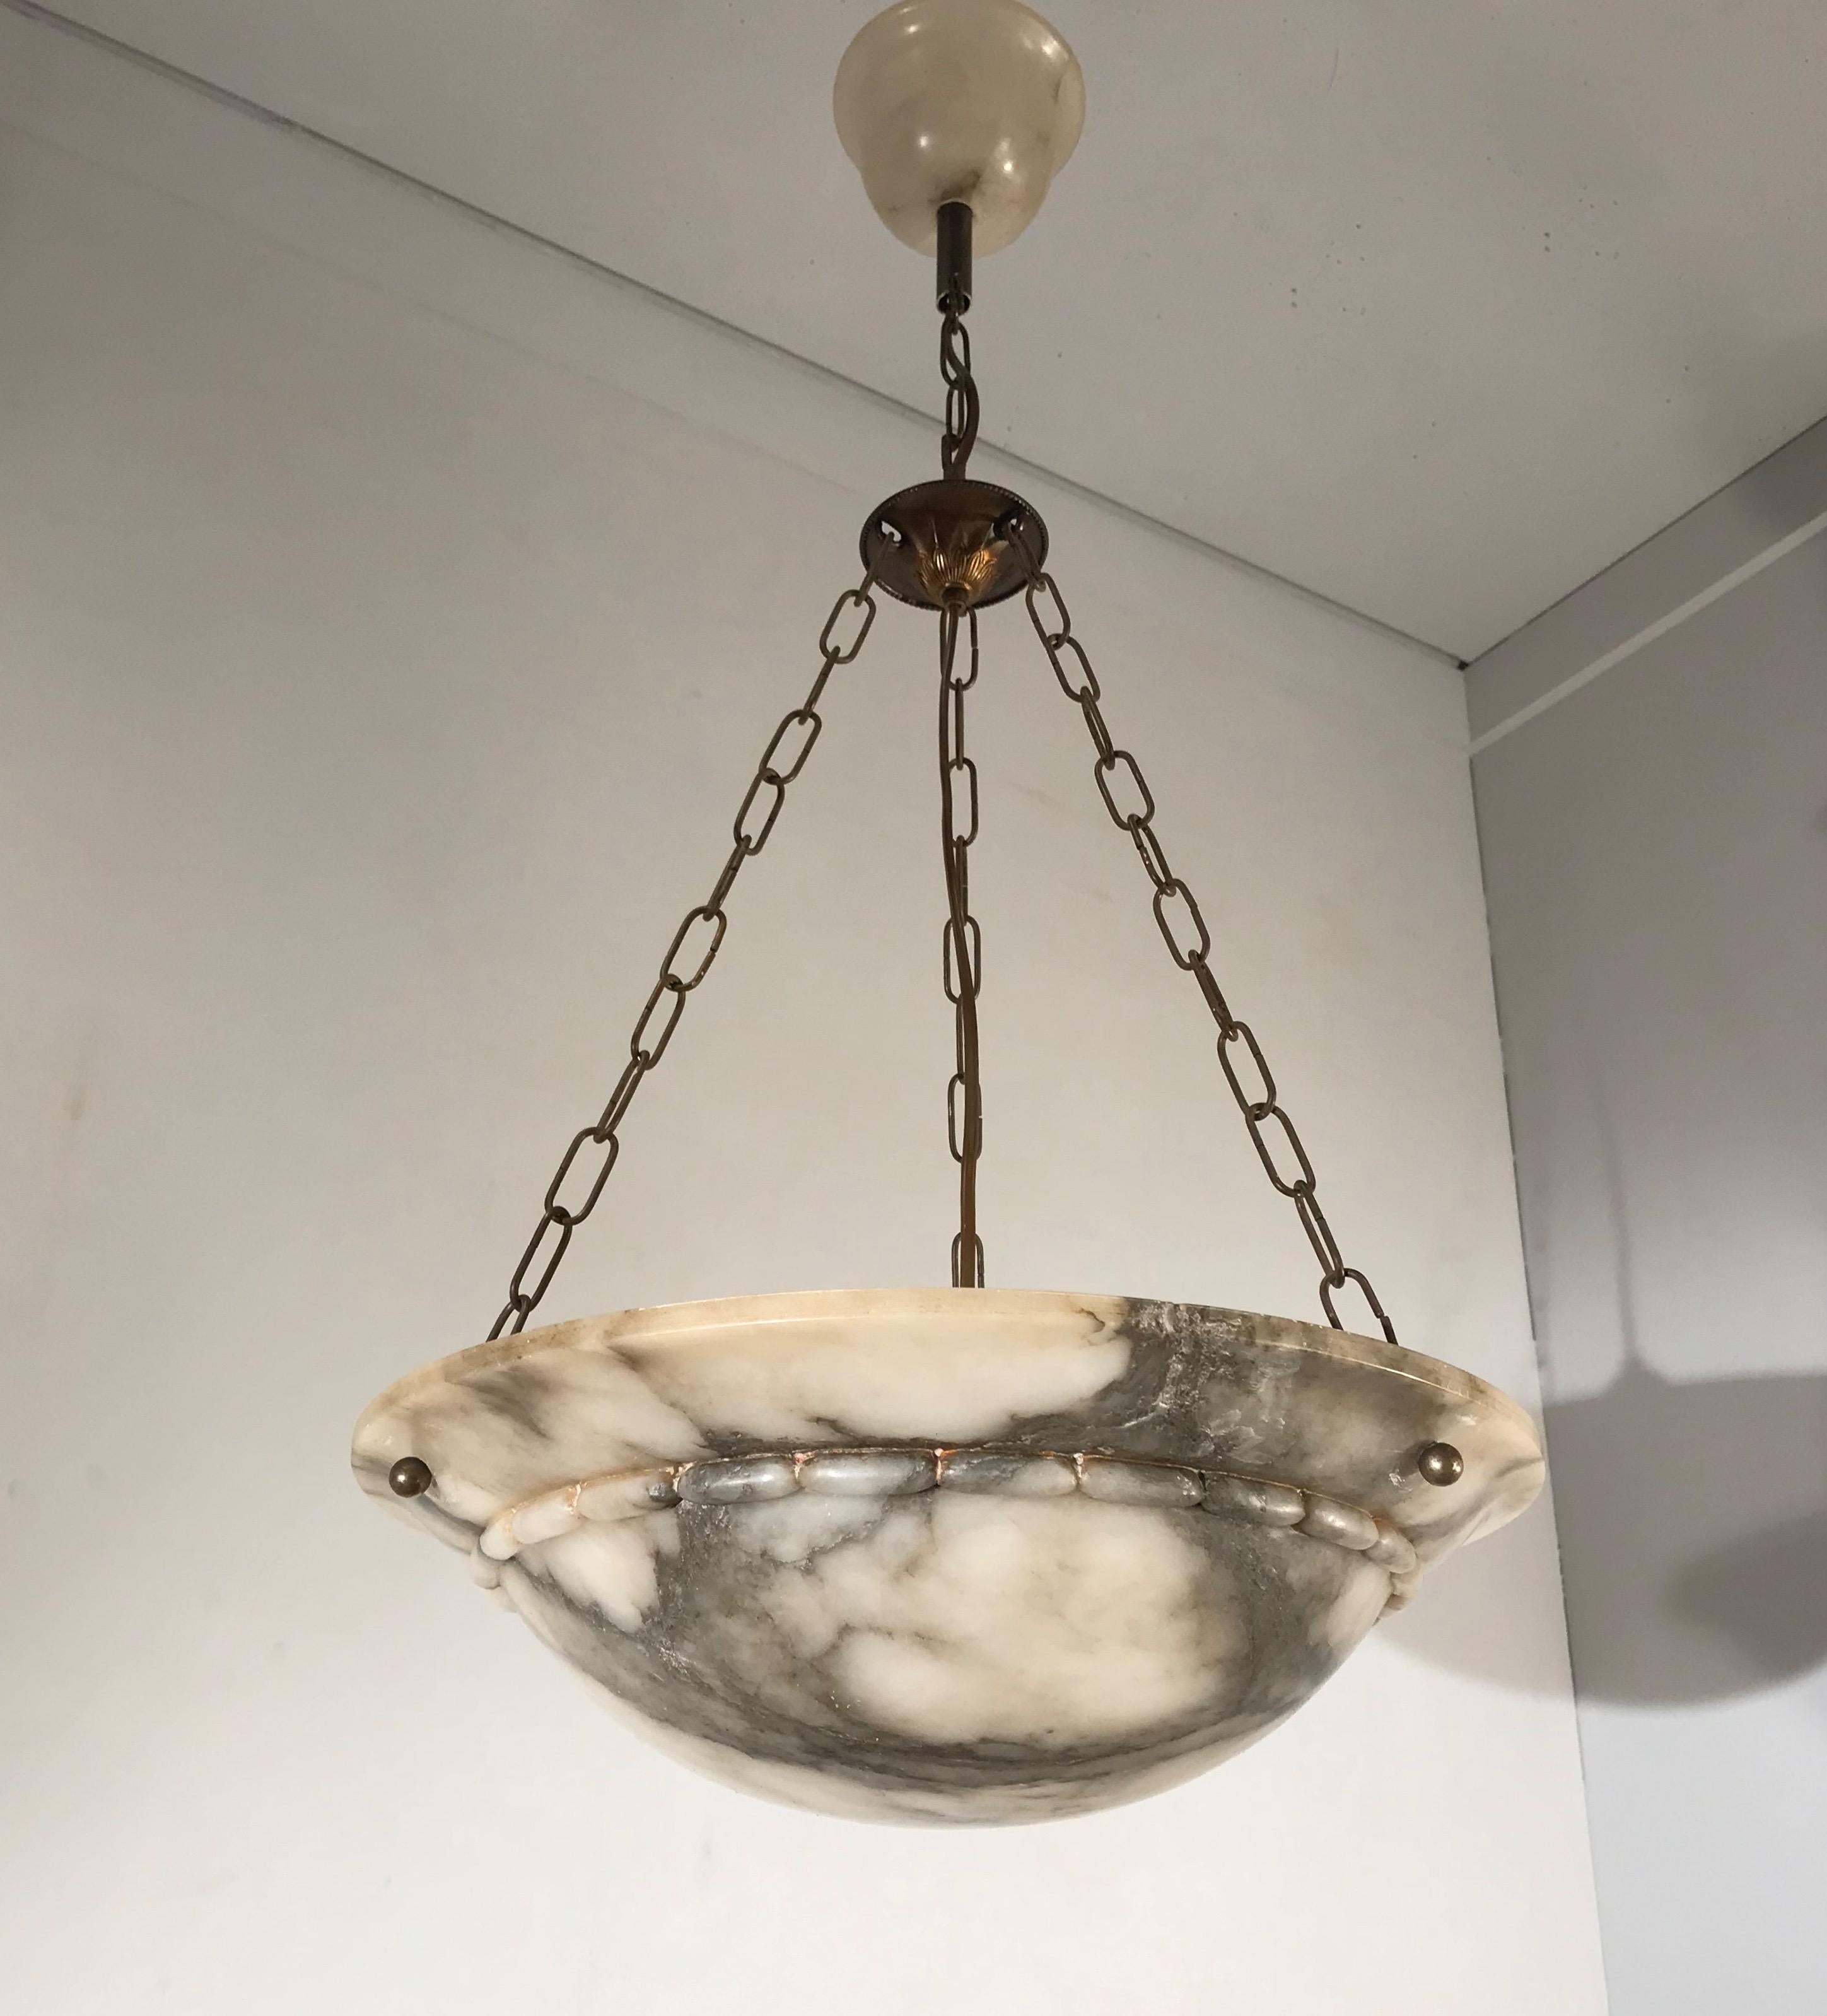 Stunning Early 1900s Arts & Crafts White and Black Veins Alabaster Pendant Light 2